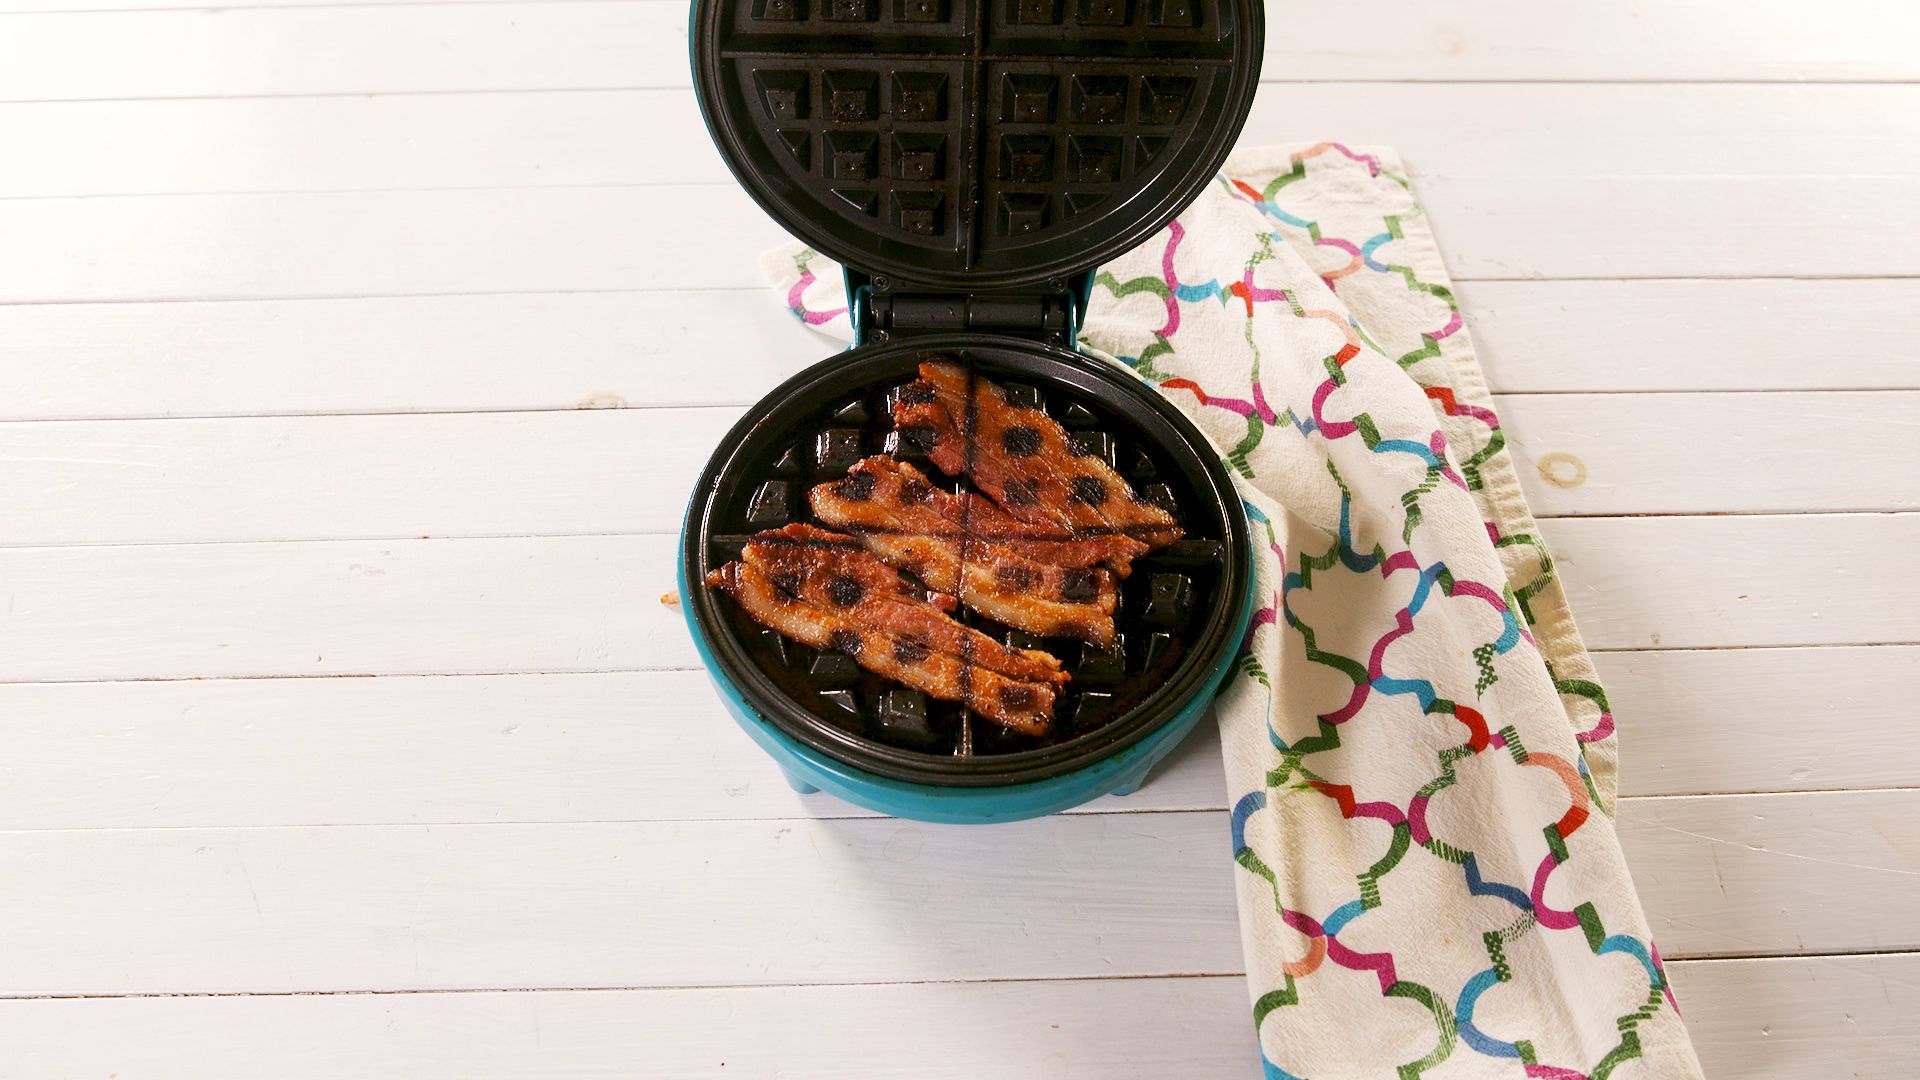 How Do You Cook Bacon In A Waffle Iron